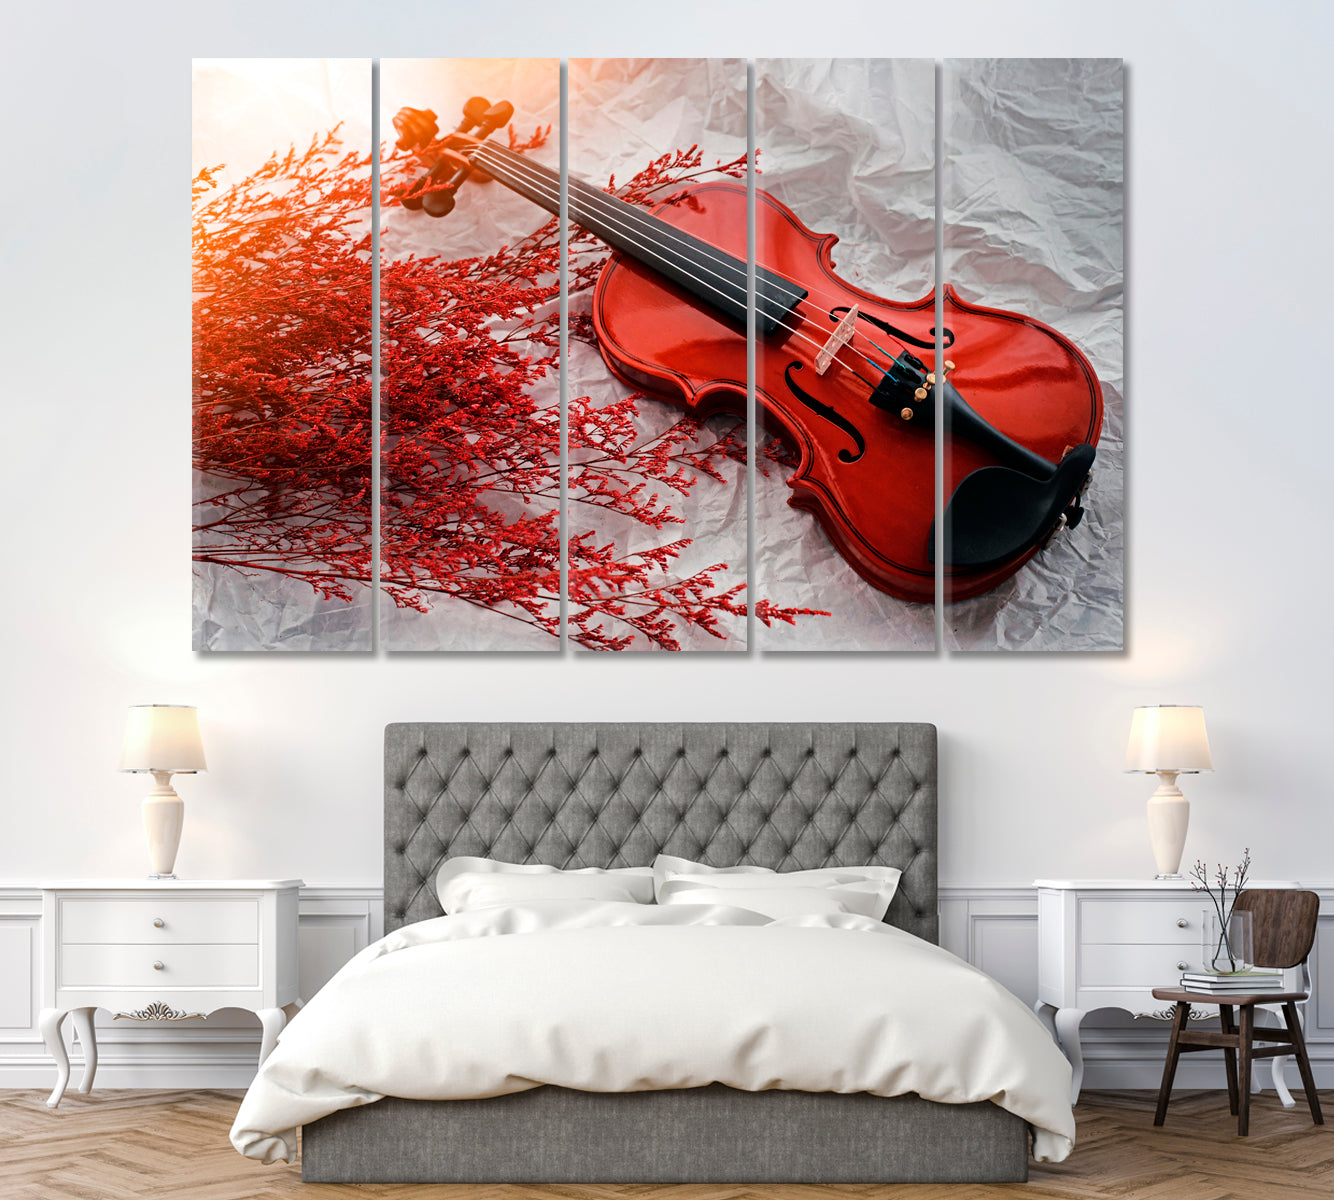 Violin with Dried Flowers Canvas Print ArtLexy 5 Panels 36"x24" inches 